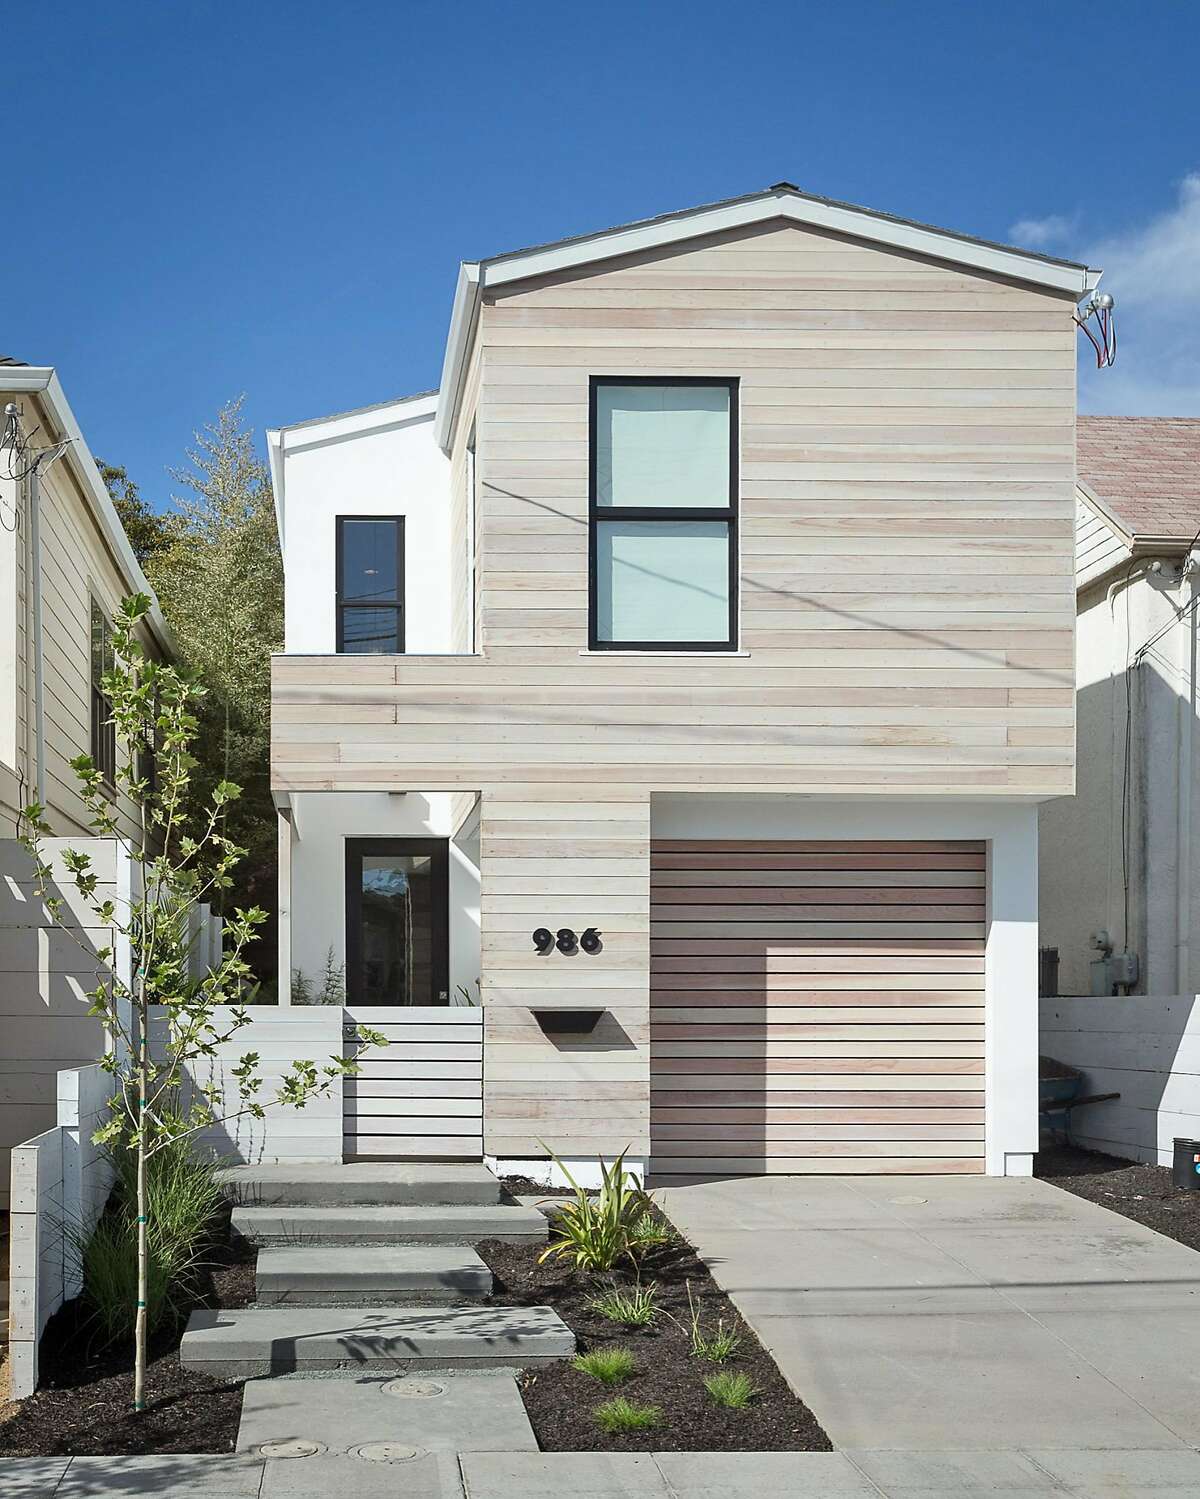 Hot Property: New construction in North Oakland subtly stands out